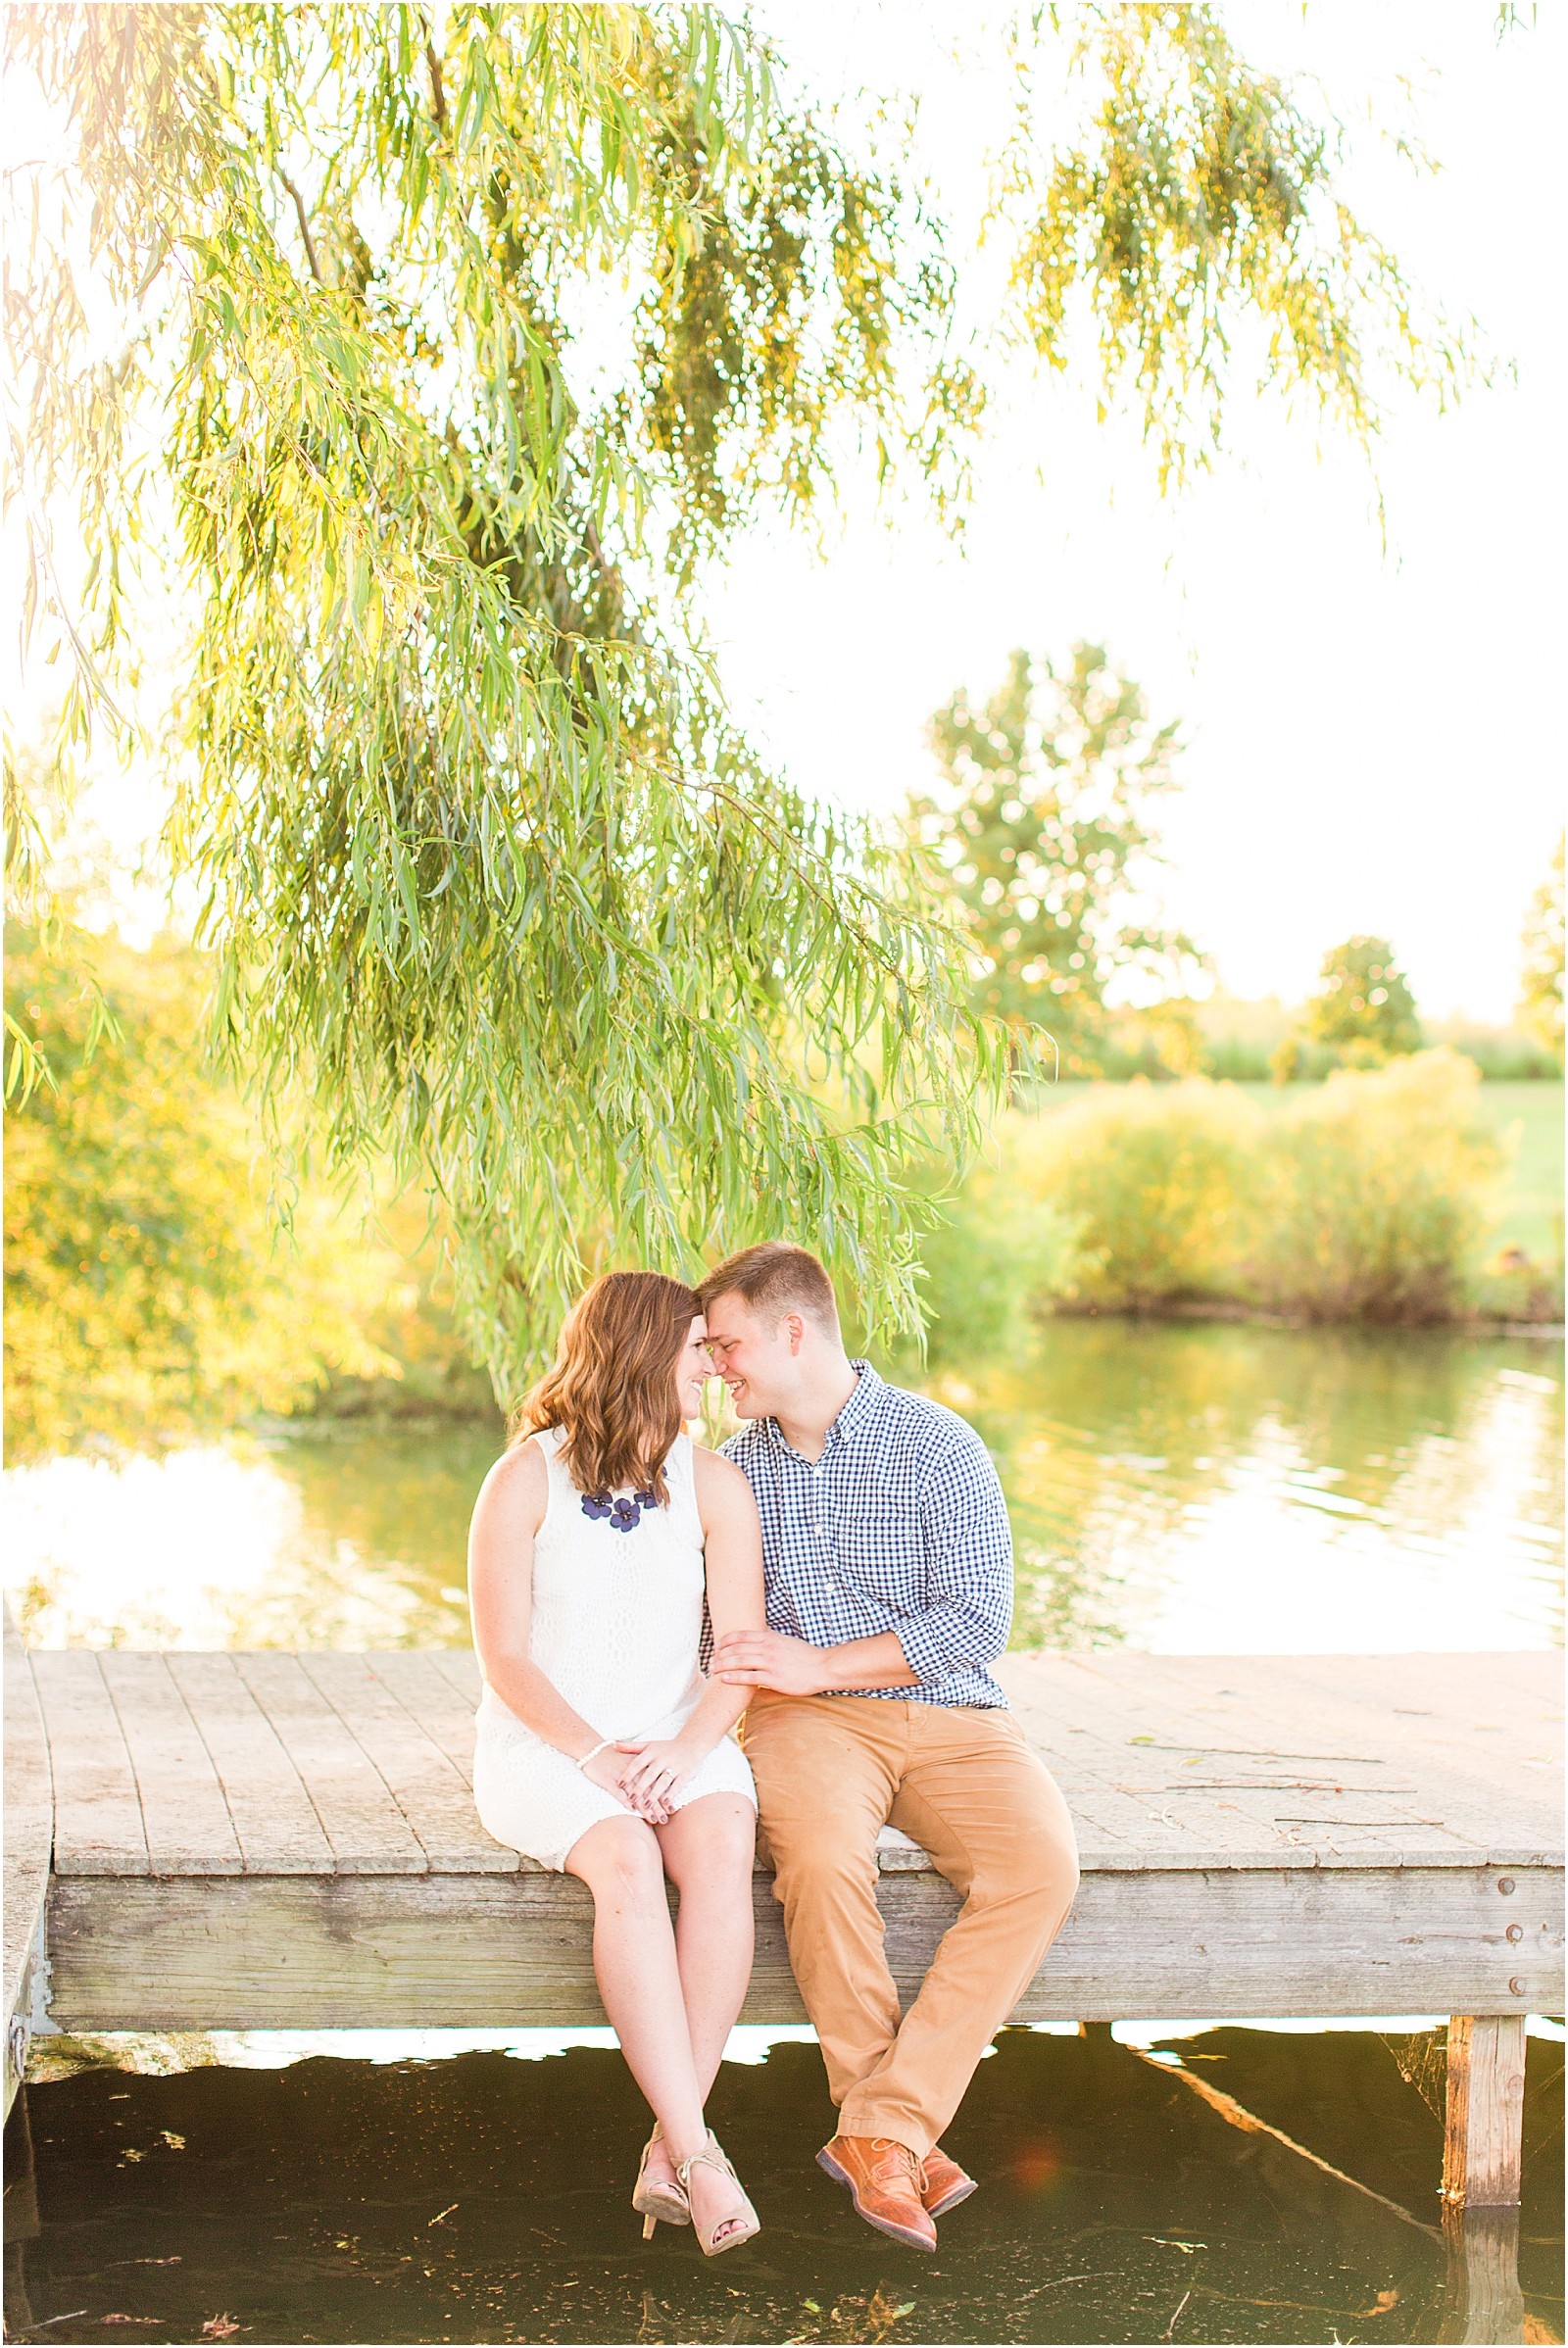 Downtown Huntingburgh Engagement Session | Gabby and Aidan | Bret and Brtandie Photography 019.jpg